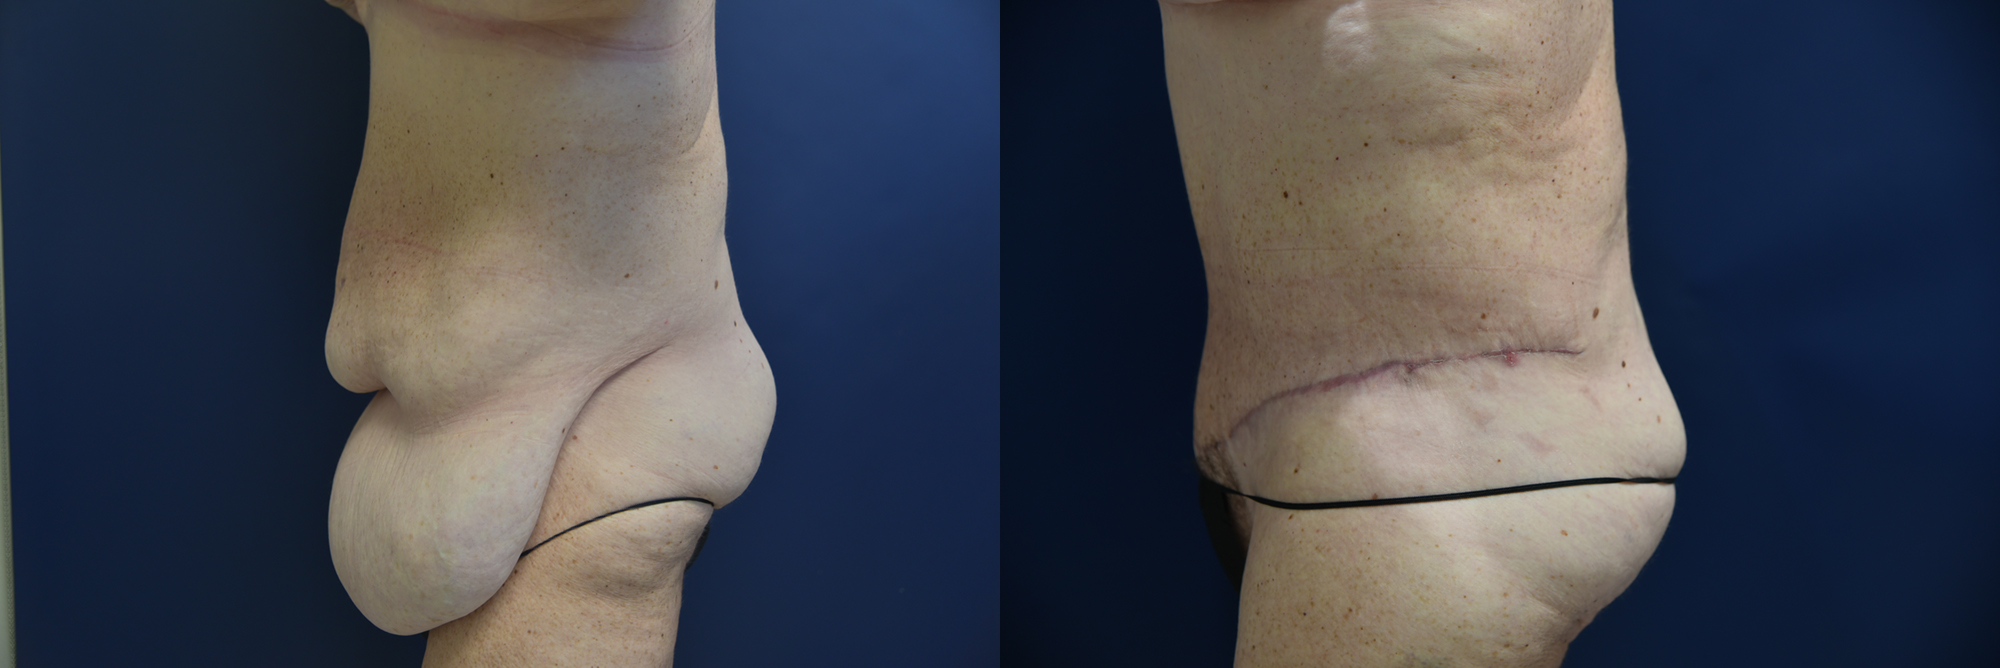 Body Lift after Major Weight Loss Before and After Photo by Dr. Leveque of Gulf Coast Plastic Surgery in Pensacola, FL